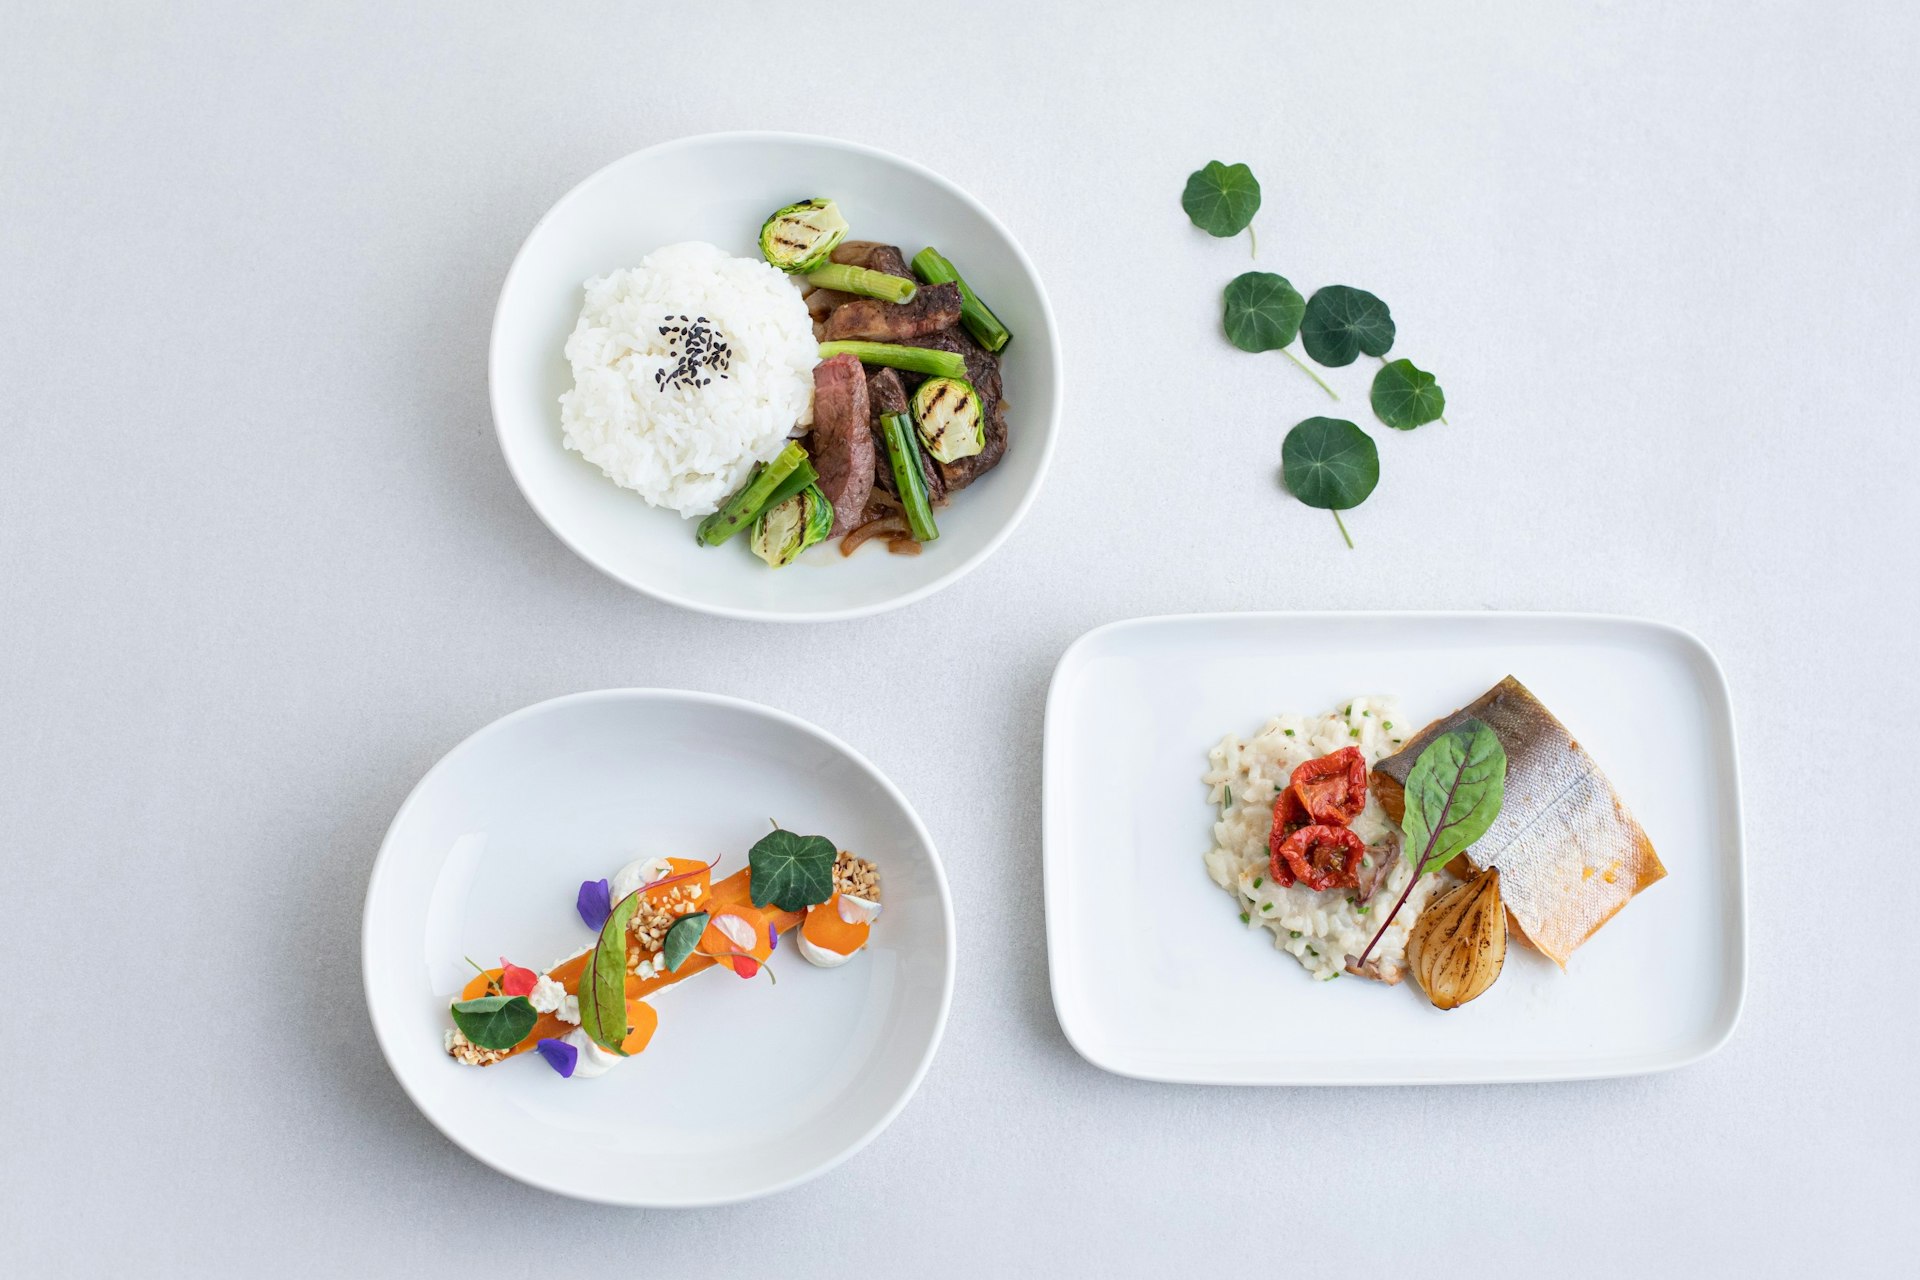 An airline meal in three bowls on a white background